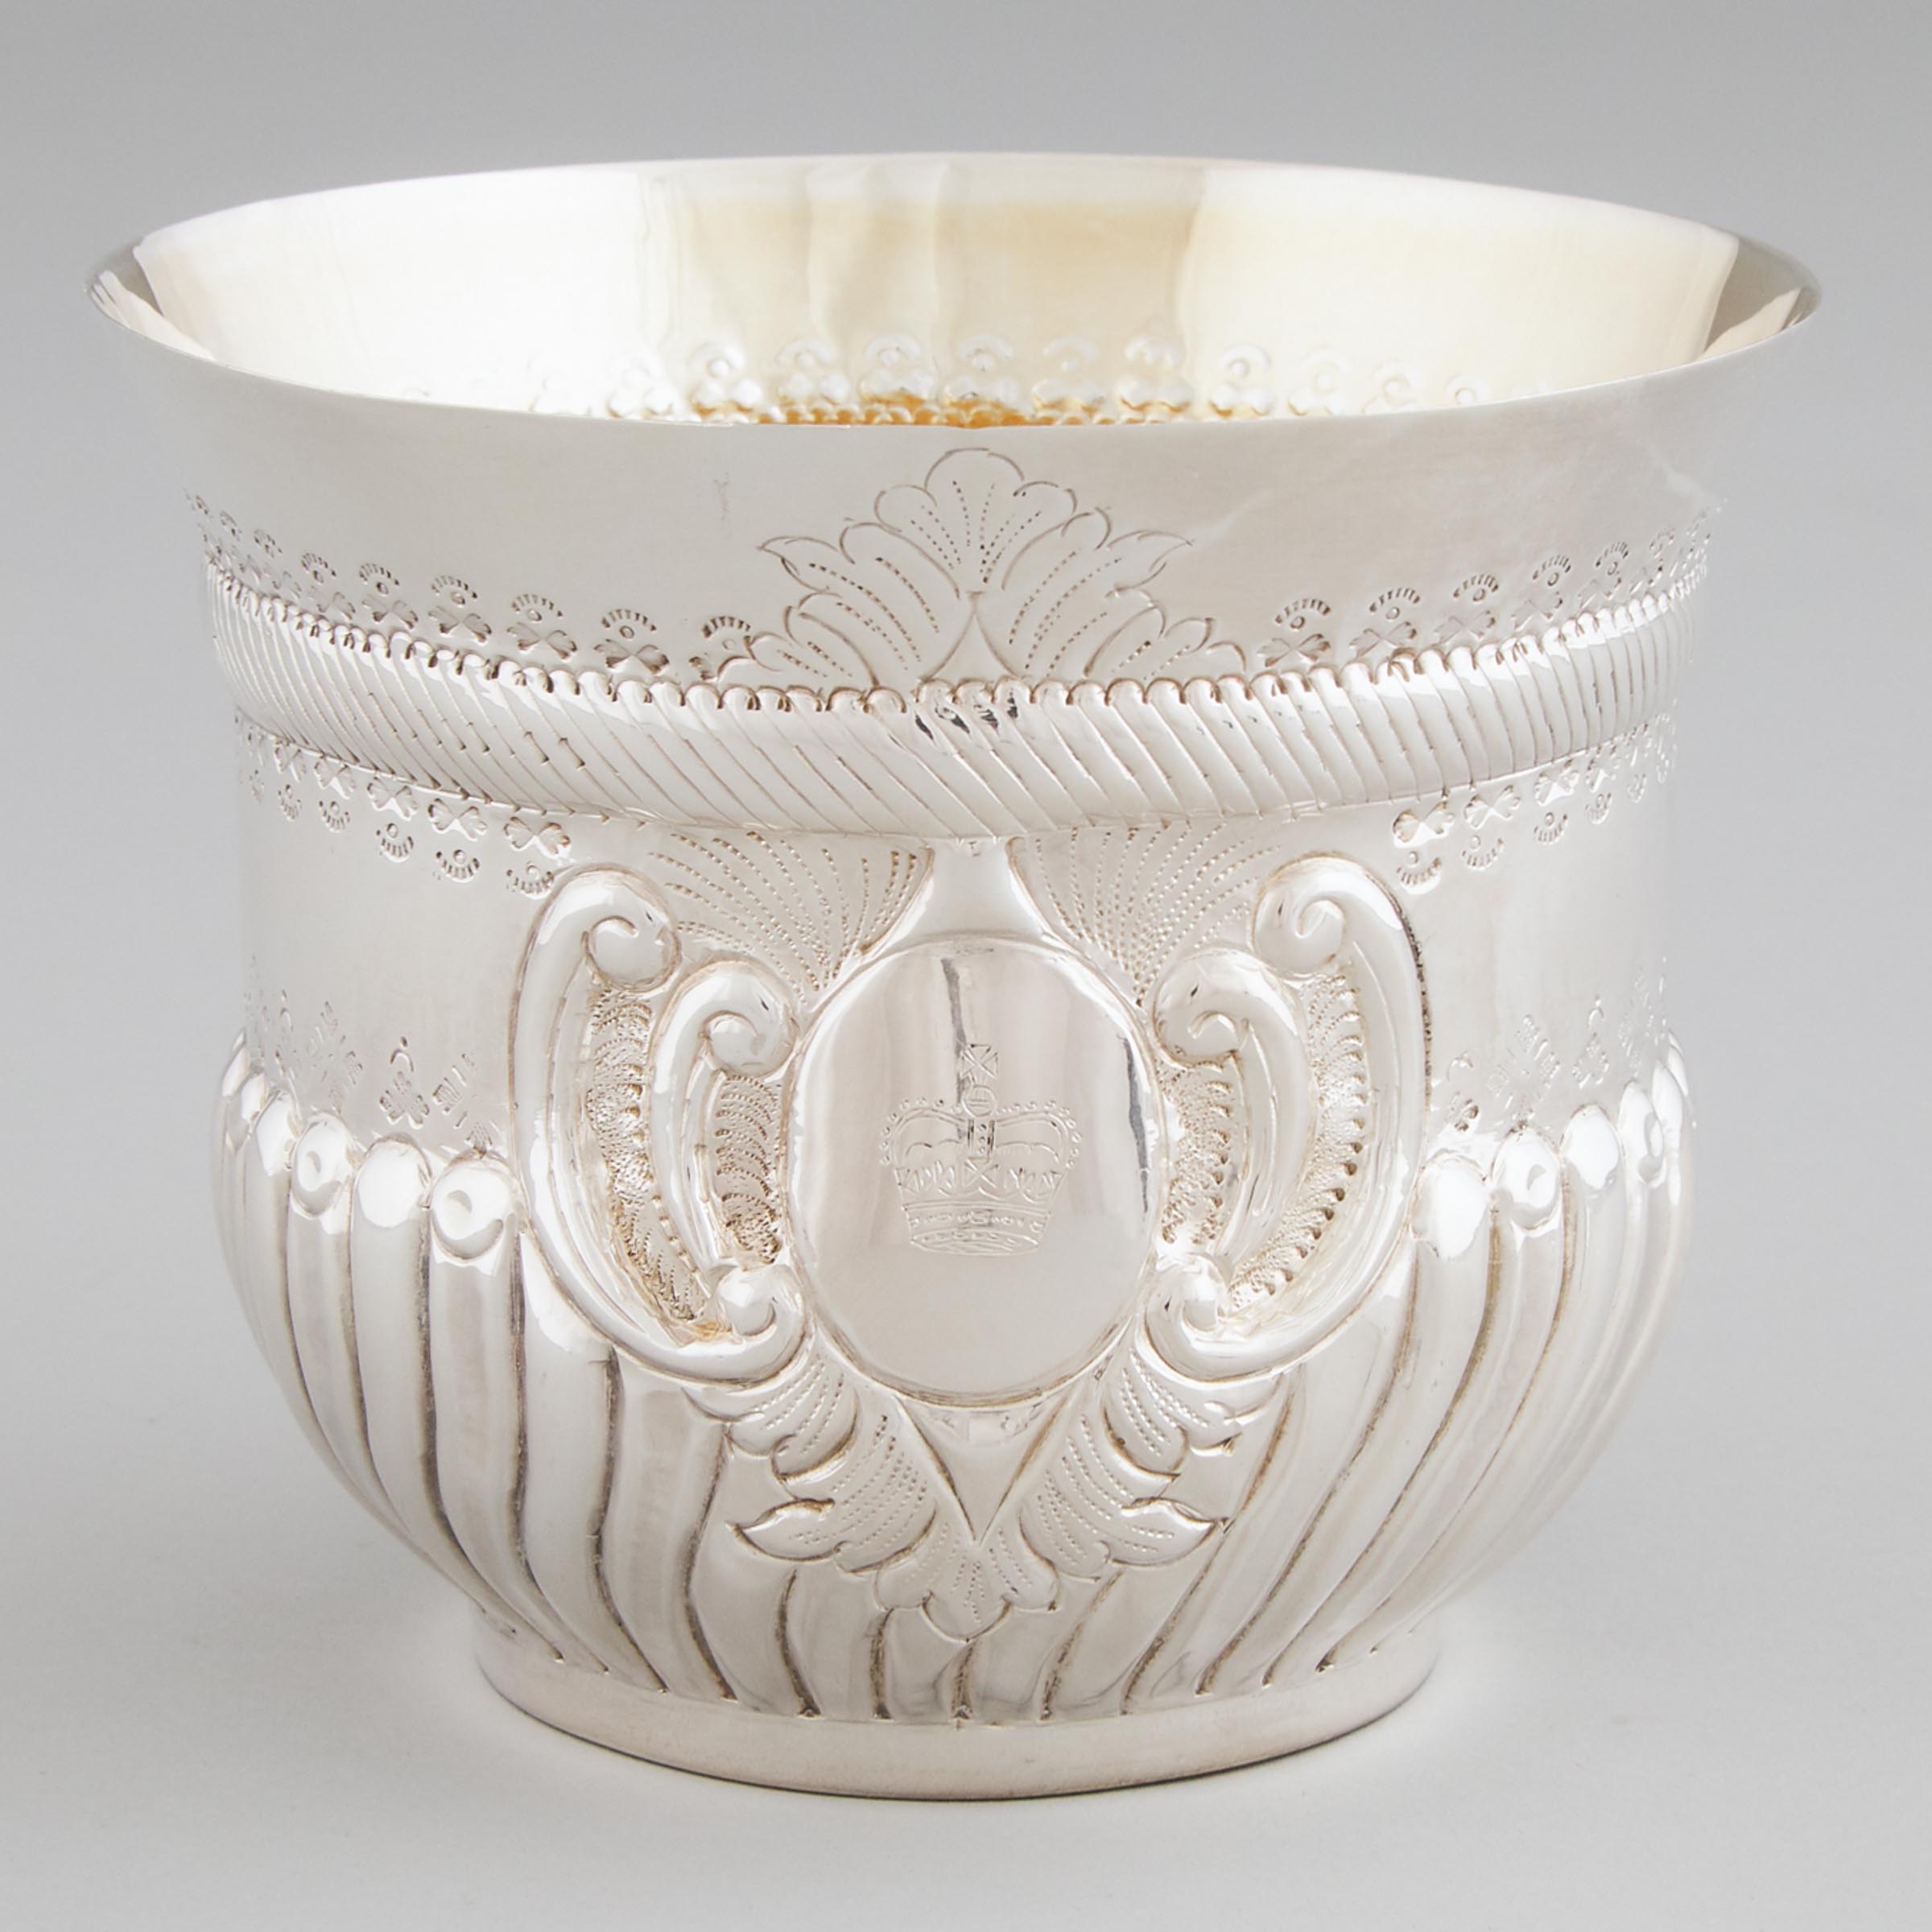 Indian Silver Caudle Cup, 20th